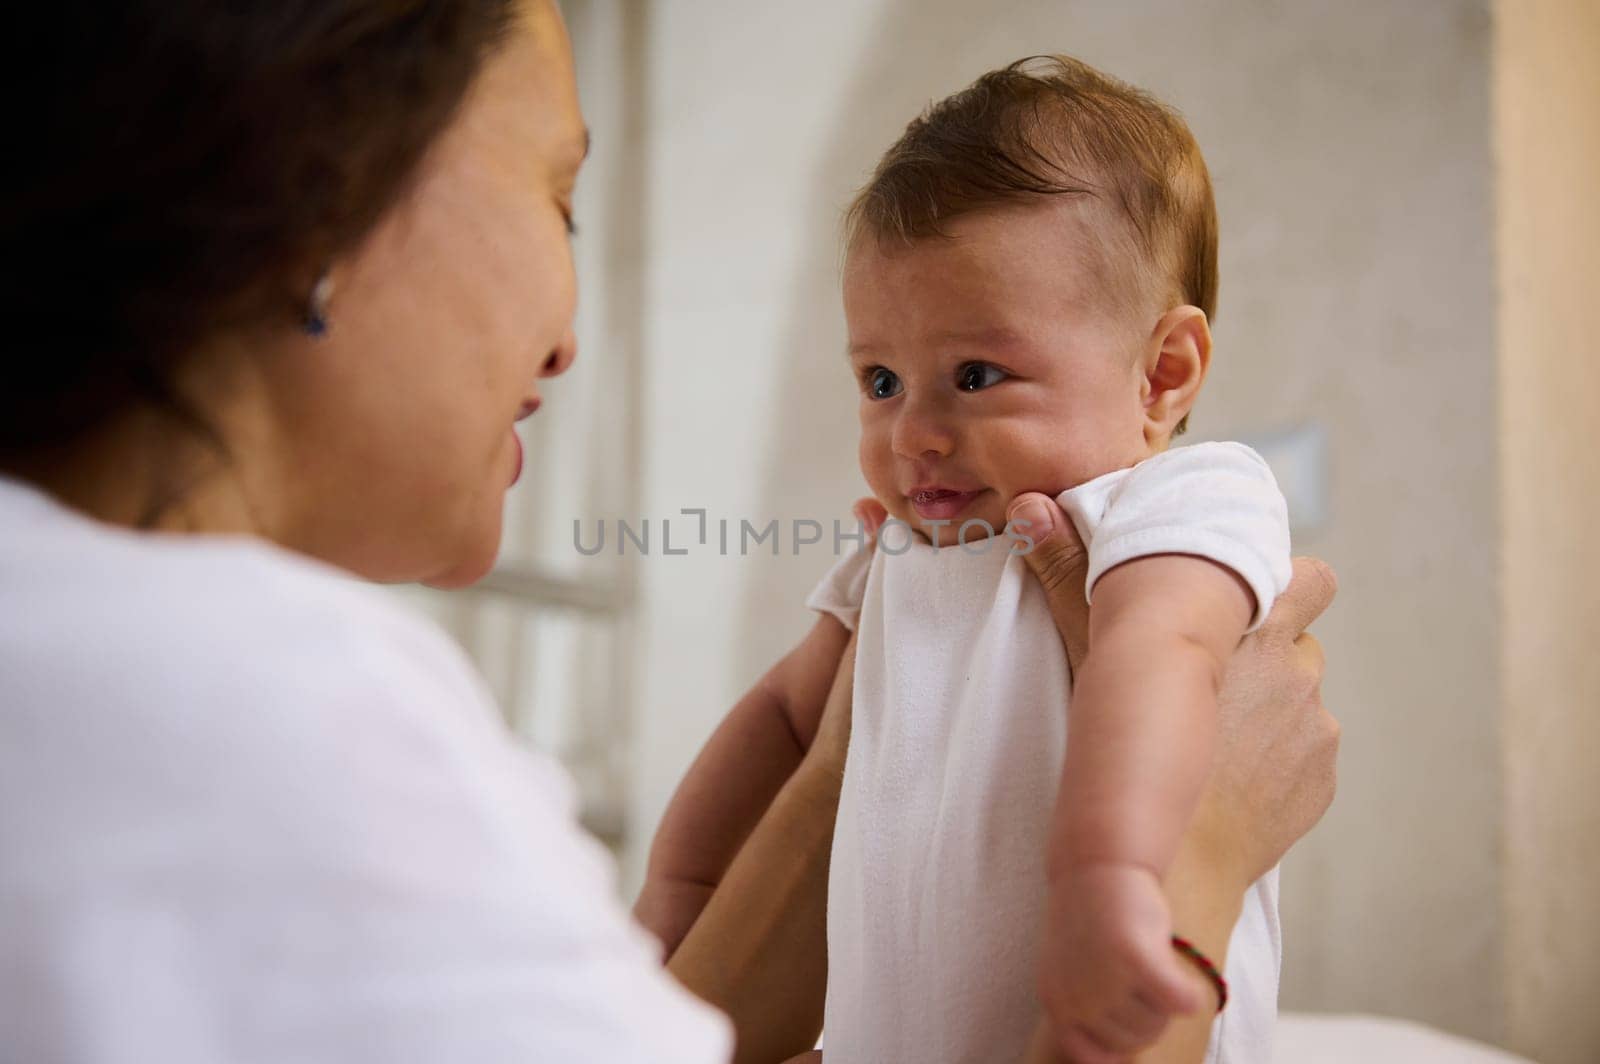 Close-up authentic portrait of adorable baby boy, child of 4 months old smiling to his affectionate loving caring mother holding him in arms. Babyhood and Infancy time. Childbirth Childcare Baby care